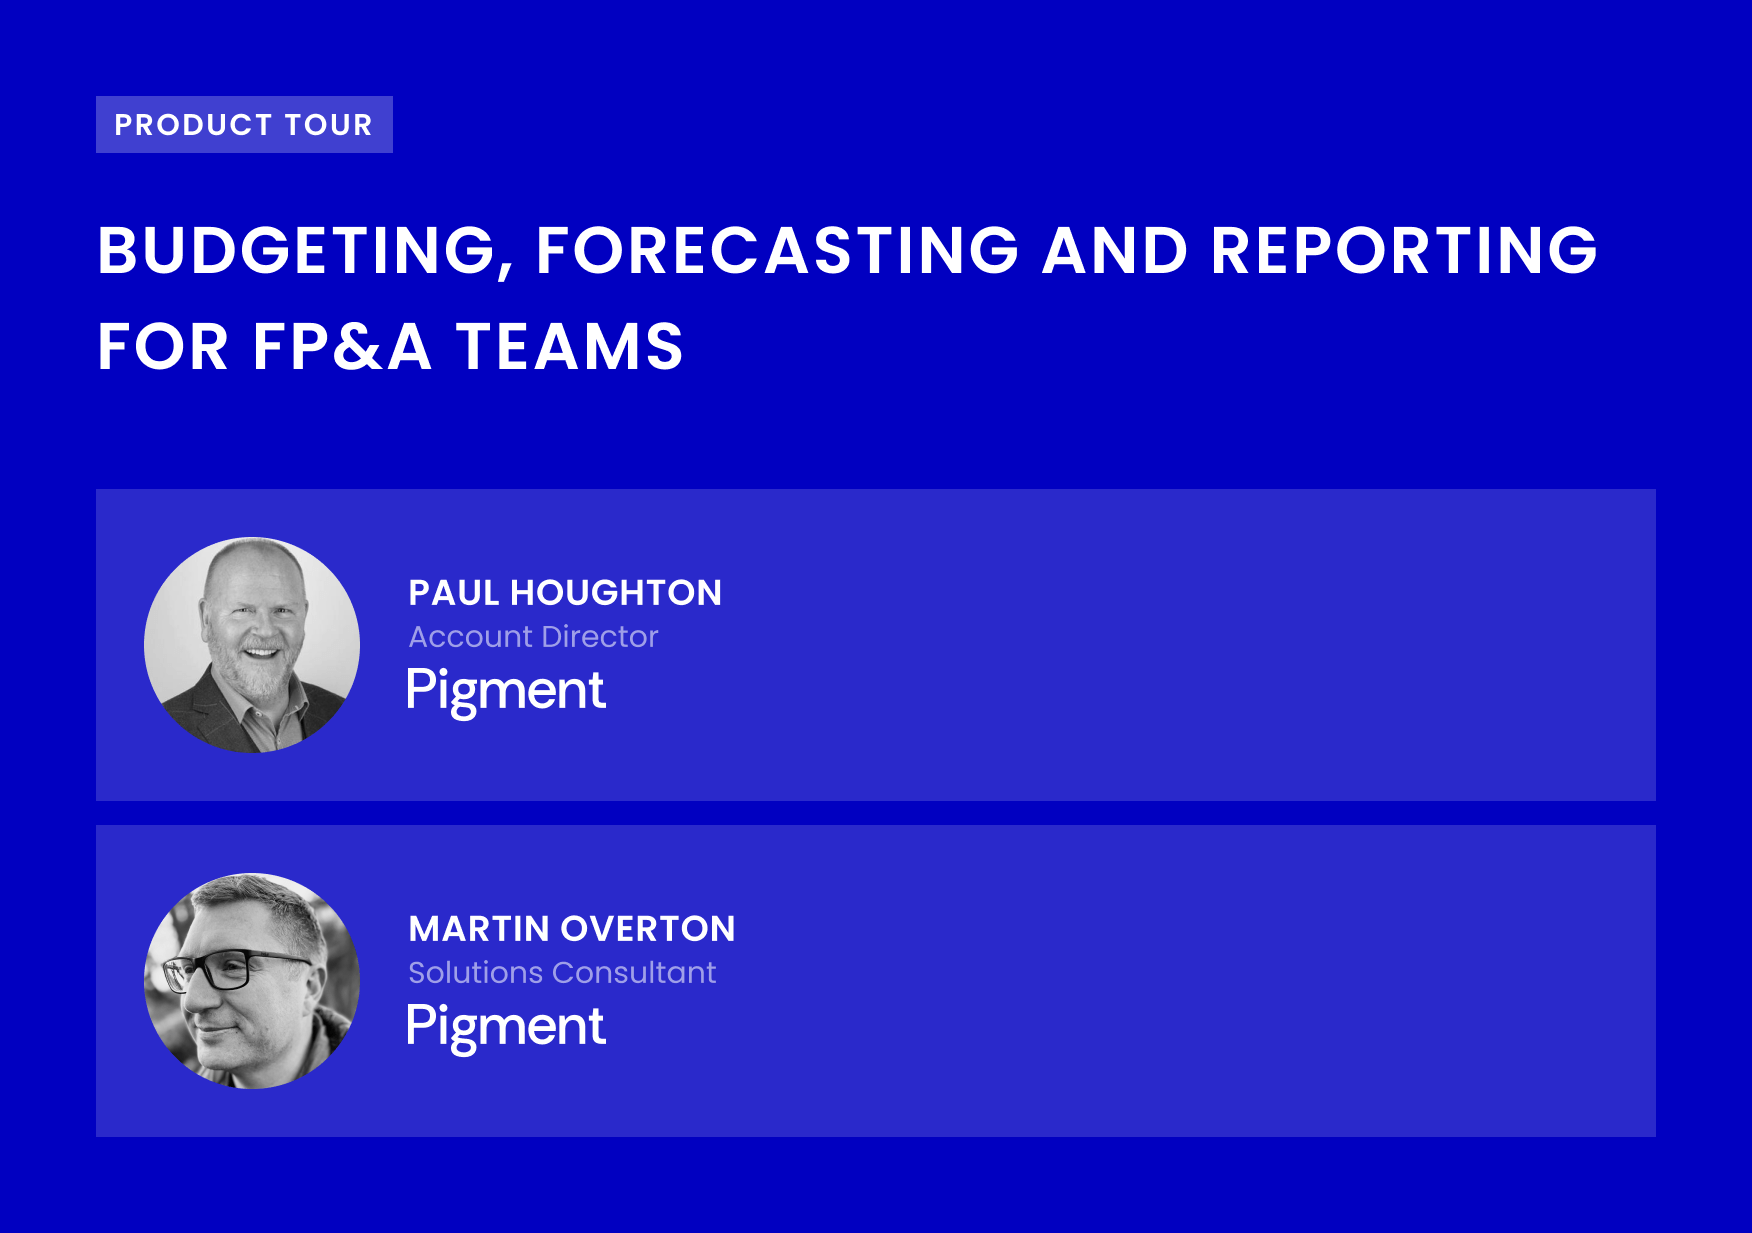 Budgeting, Forecasting and Reporting for FP&A Teams